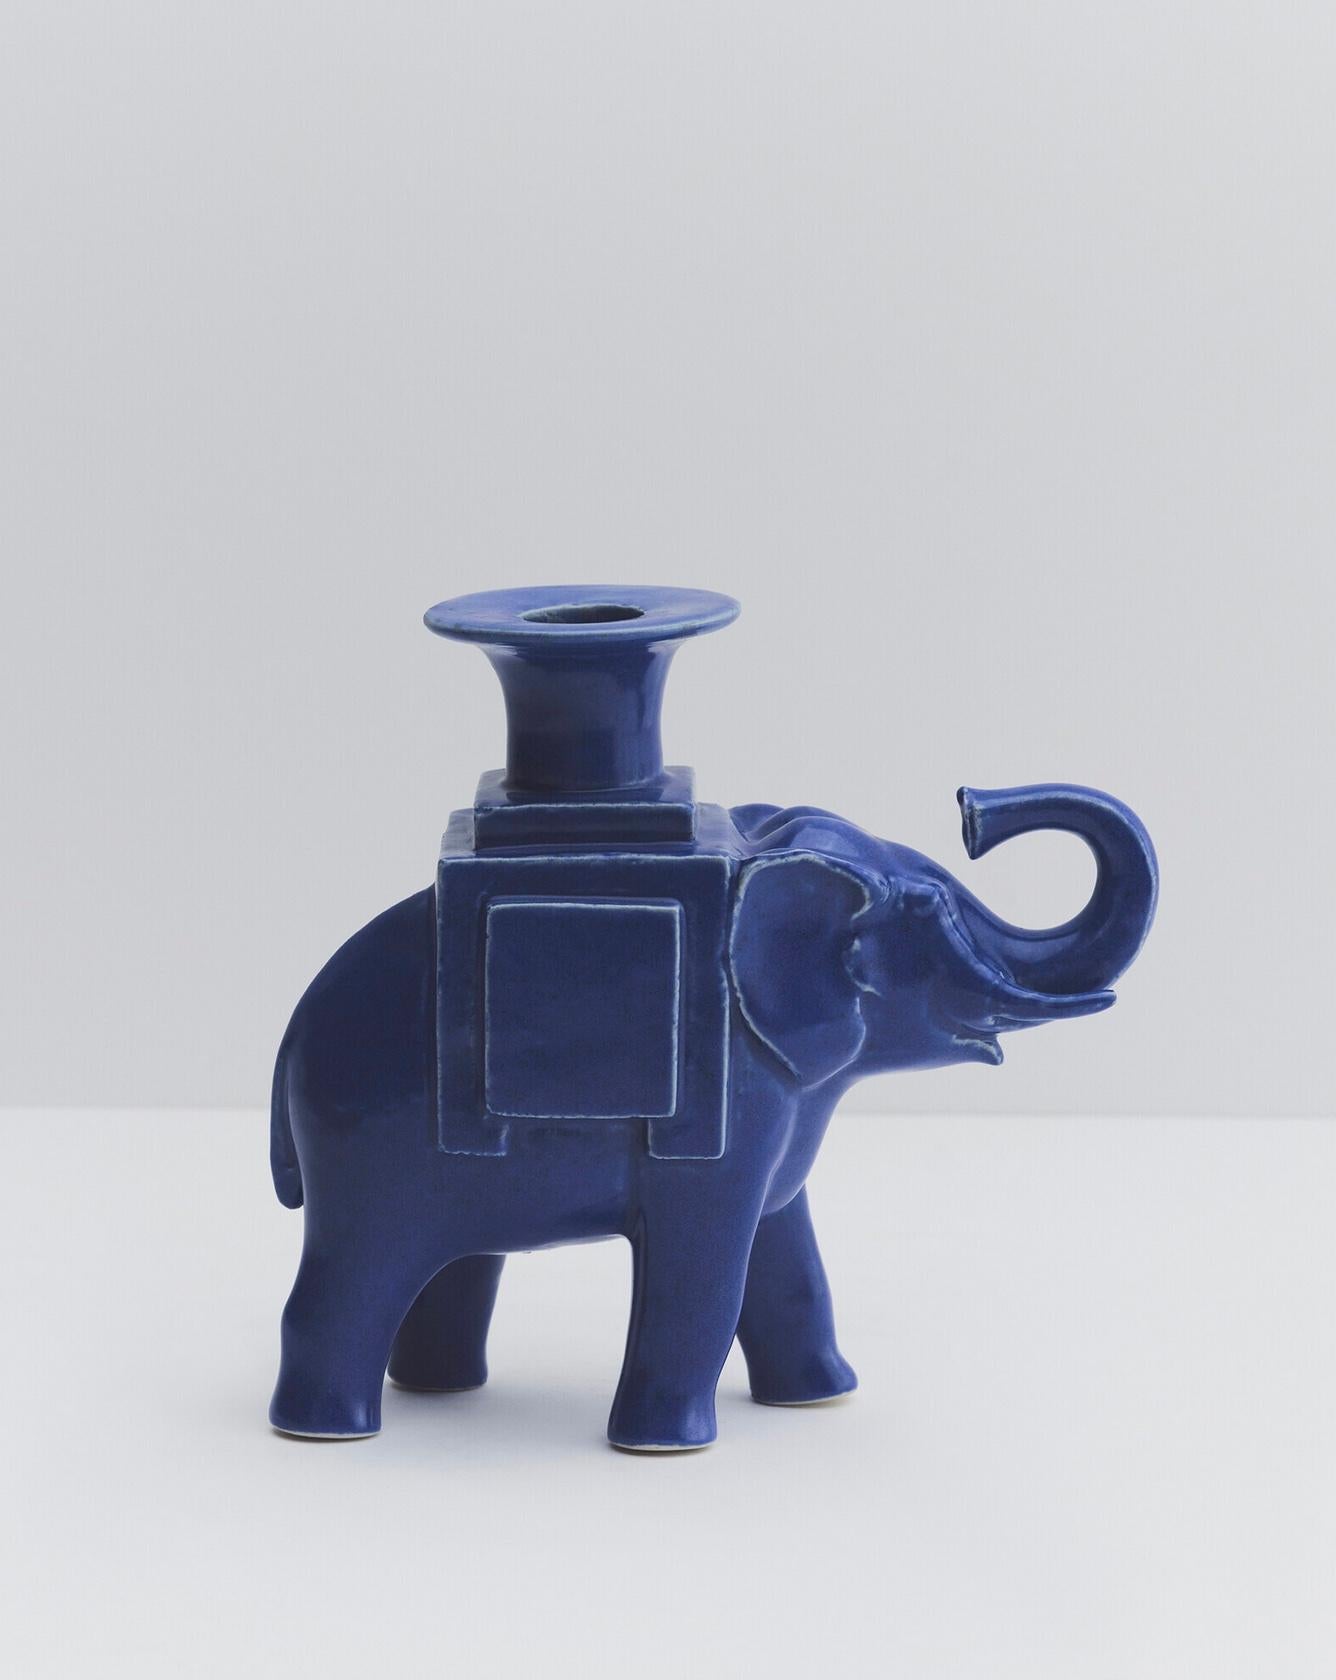 Paire Bougeoirs Elephant, Candle Stick, Animal, Ceramic, Lalanne, Design

Paire Bougeoirs Elephant
Ed. 80 pcs
1985
Glazed ceramic and copper with original boxes
15 x 15.3 x 6 cm / 5.9 x 5.9 x 2.4 in.(each)
Monogrammed, stamped, dated, numbered and